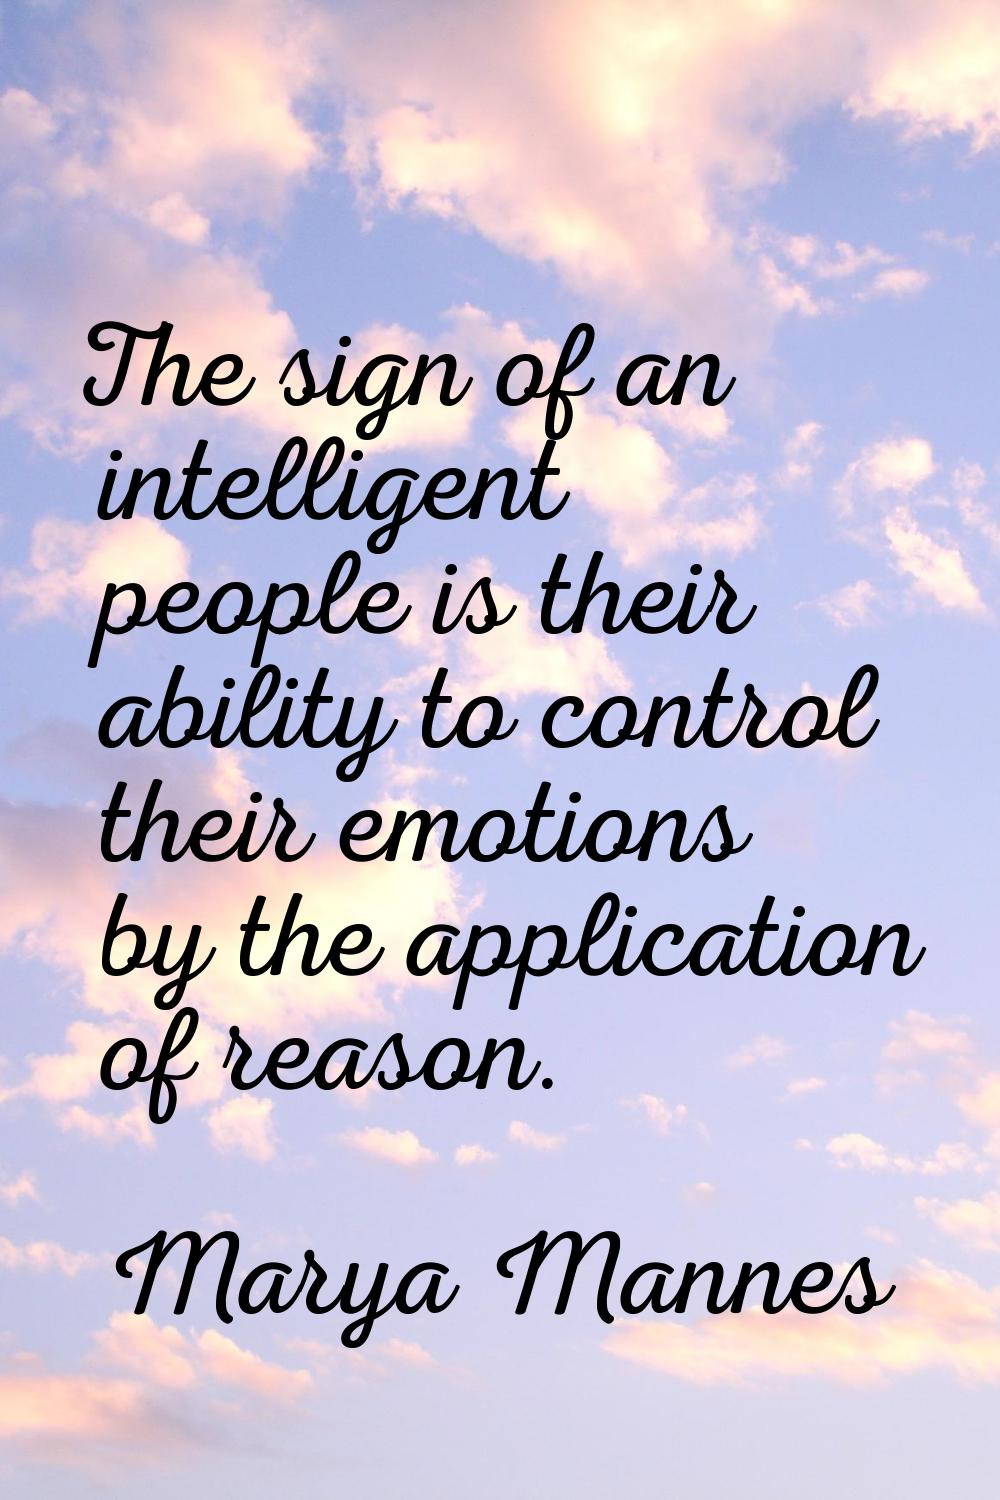 The sign of an intelligent people is their ability to control their emotions by the application of 